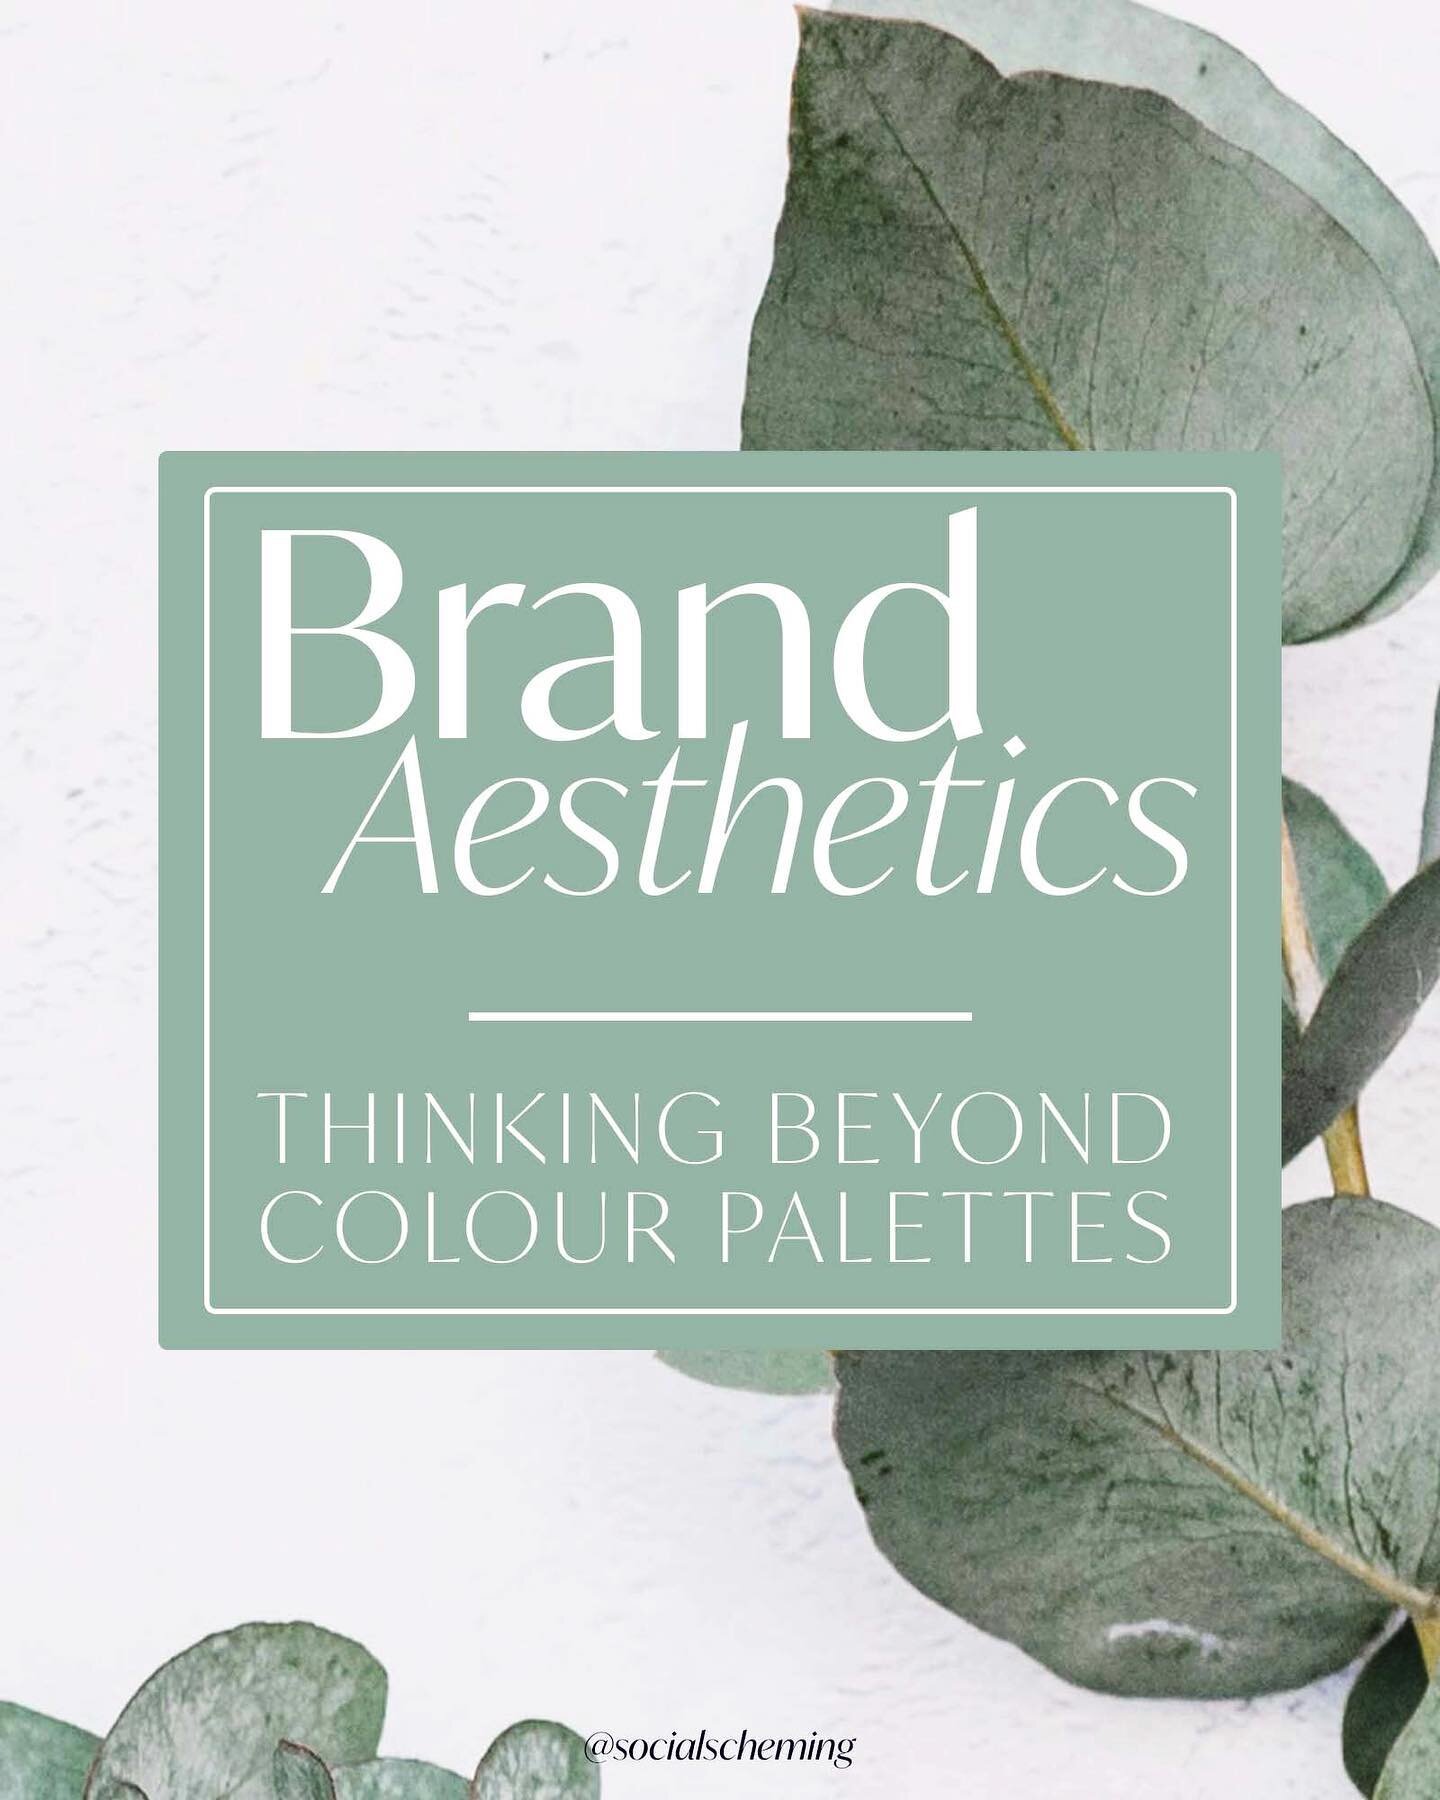 Visual elements beyond colour choice to consider when defining your brand&rsquo;s aesthetic identity. By no means a technical or comprehensive list, but anything that helps you narrow down your visuals even a little bit is a step in the right directi